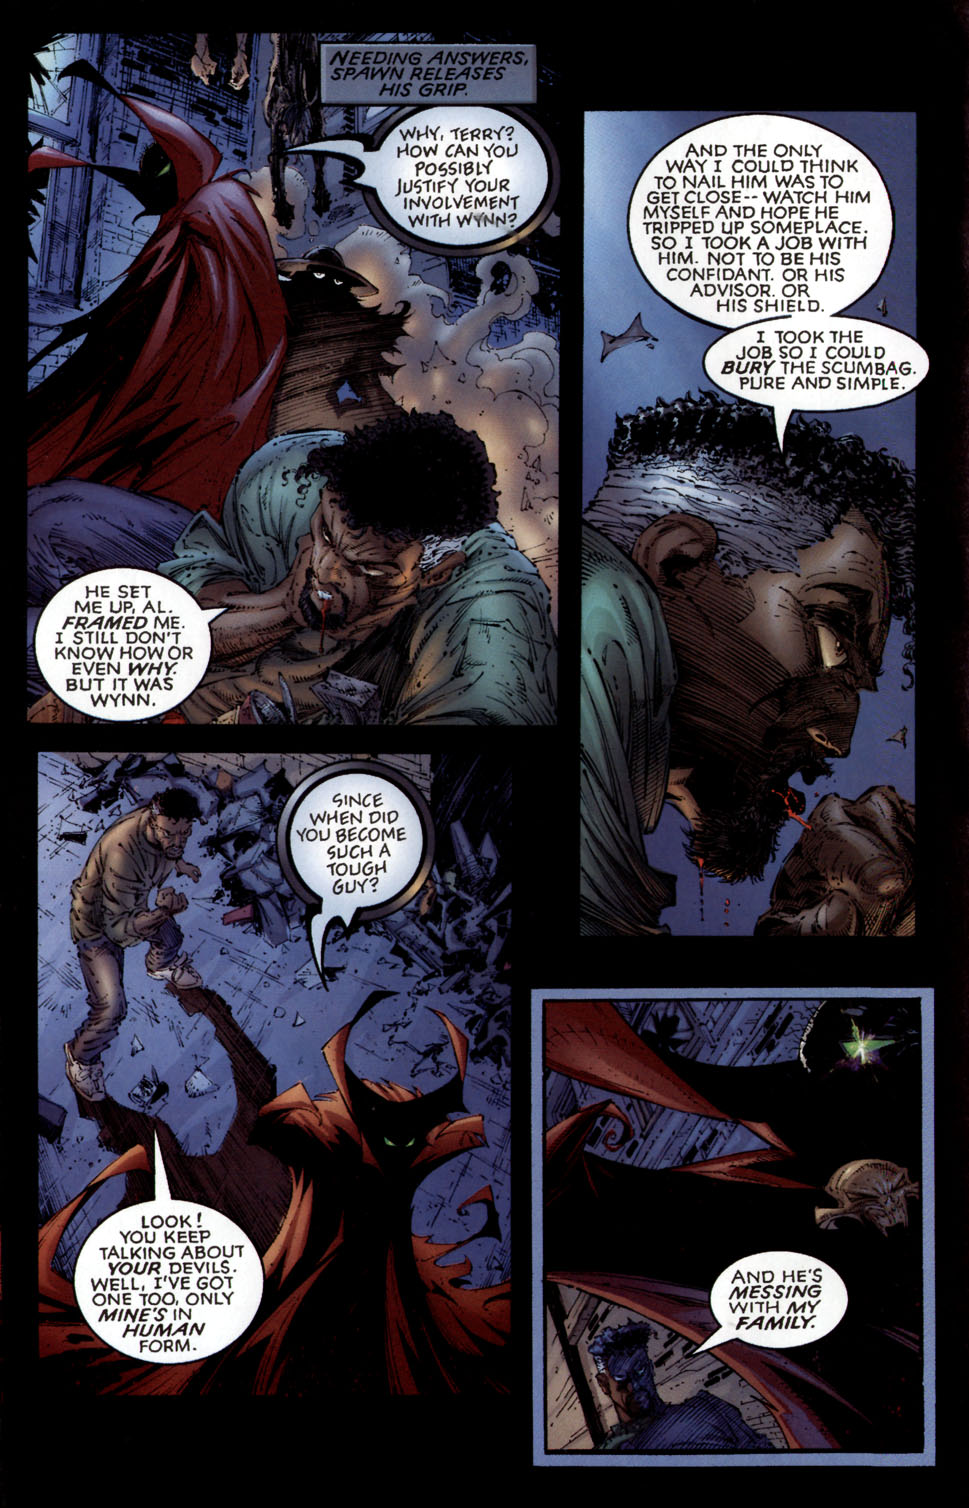 comic book - Needing Answers, Spawn Releases His Grip. Why, Terry? How Can You Possibly Justify Your Involvement With Wynn? And The Only Way I Could Think To Nail Him Was To Get Close Watch Him Myself And Hope He Tripped Up Someplace. So I Took A Job With